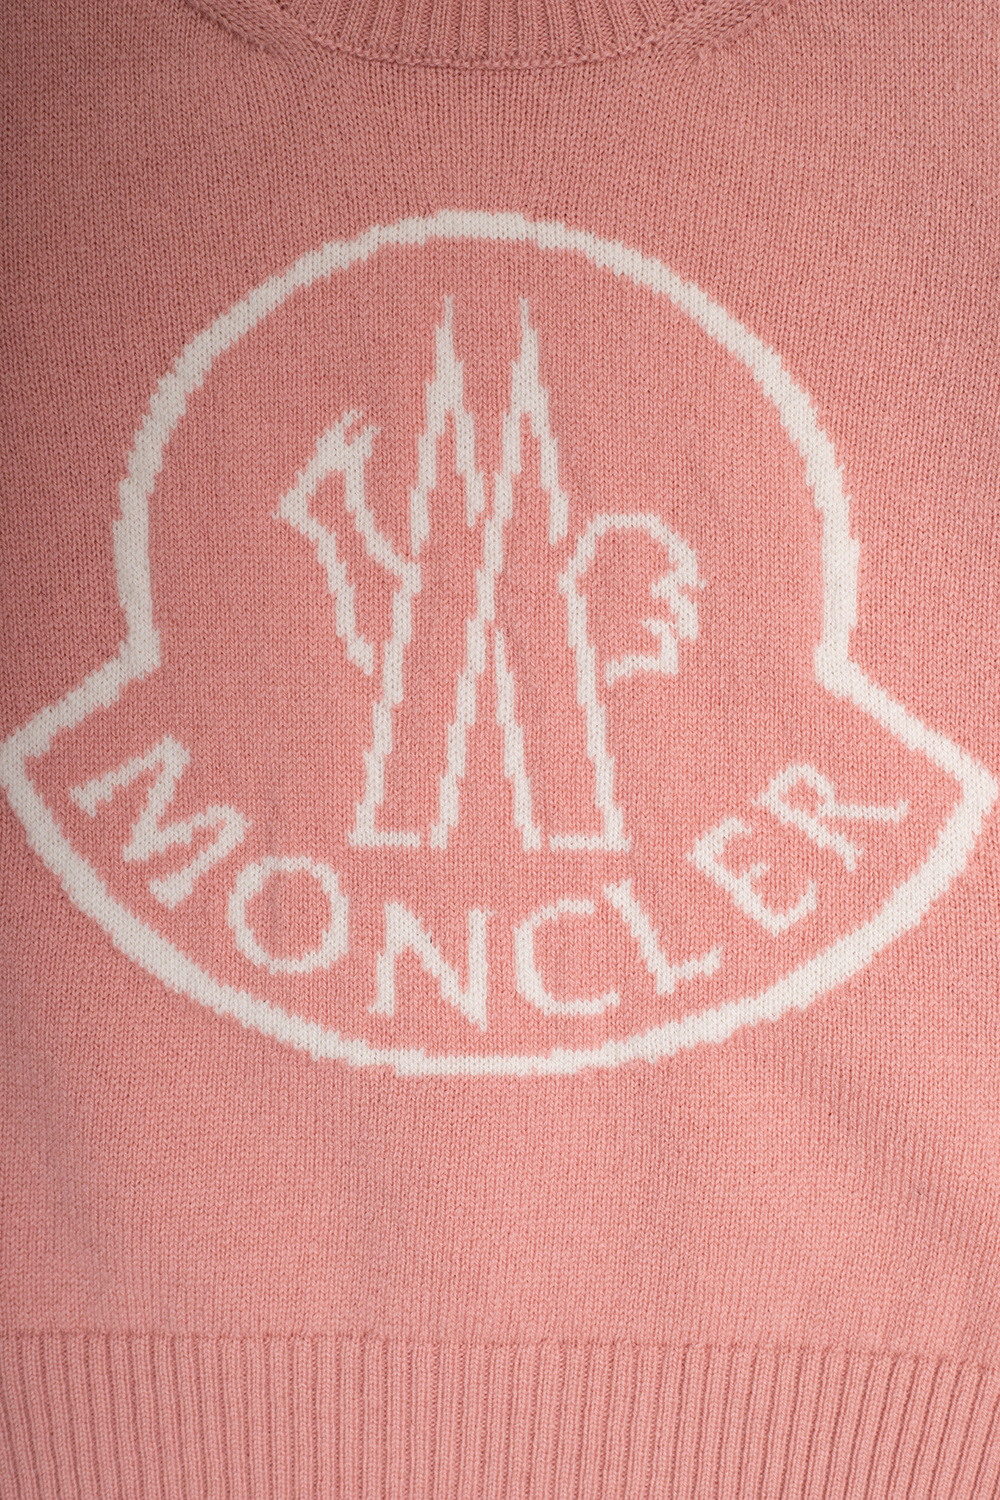 Moncler Enfant zip-up sweater with logo